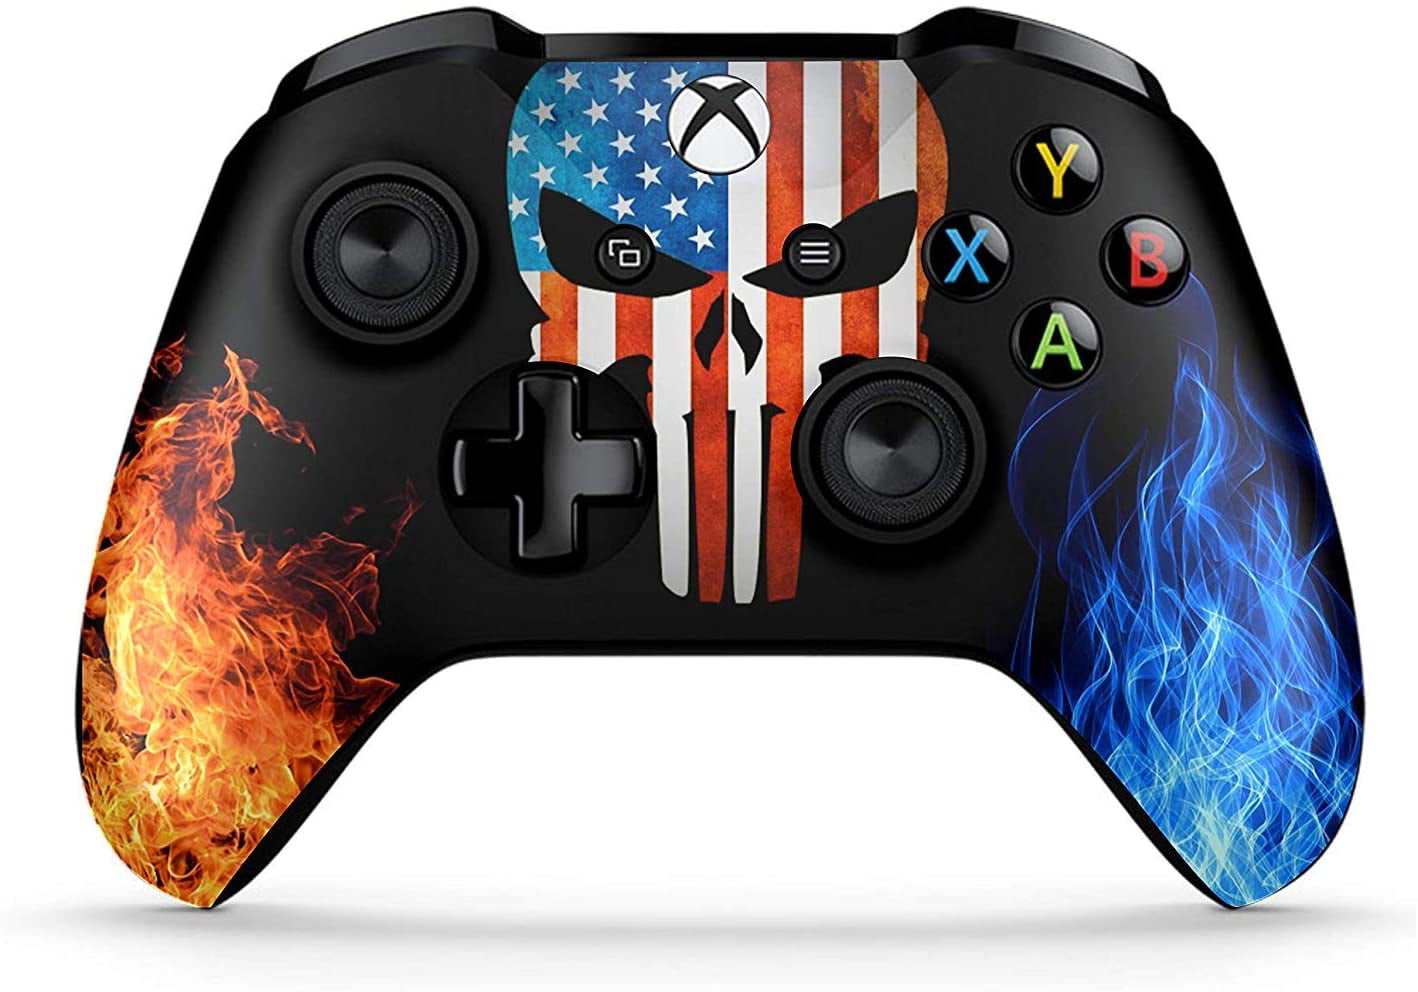 Customized Xbox One controller